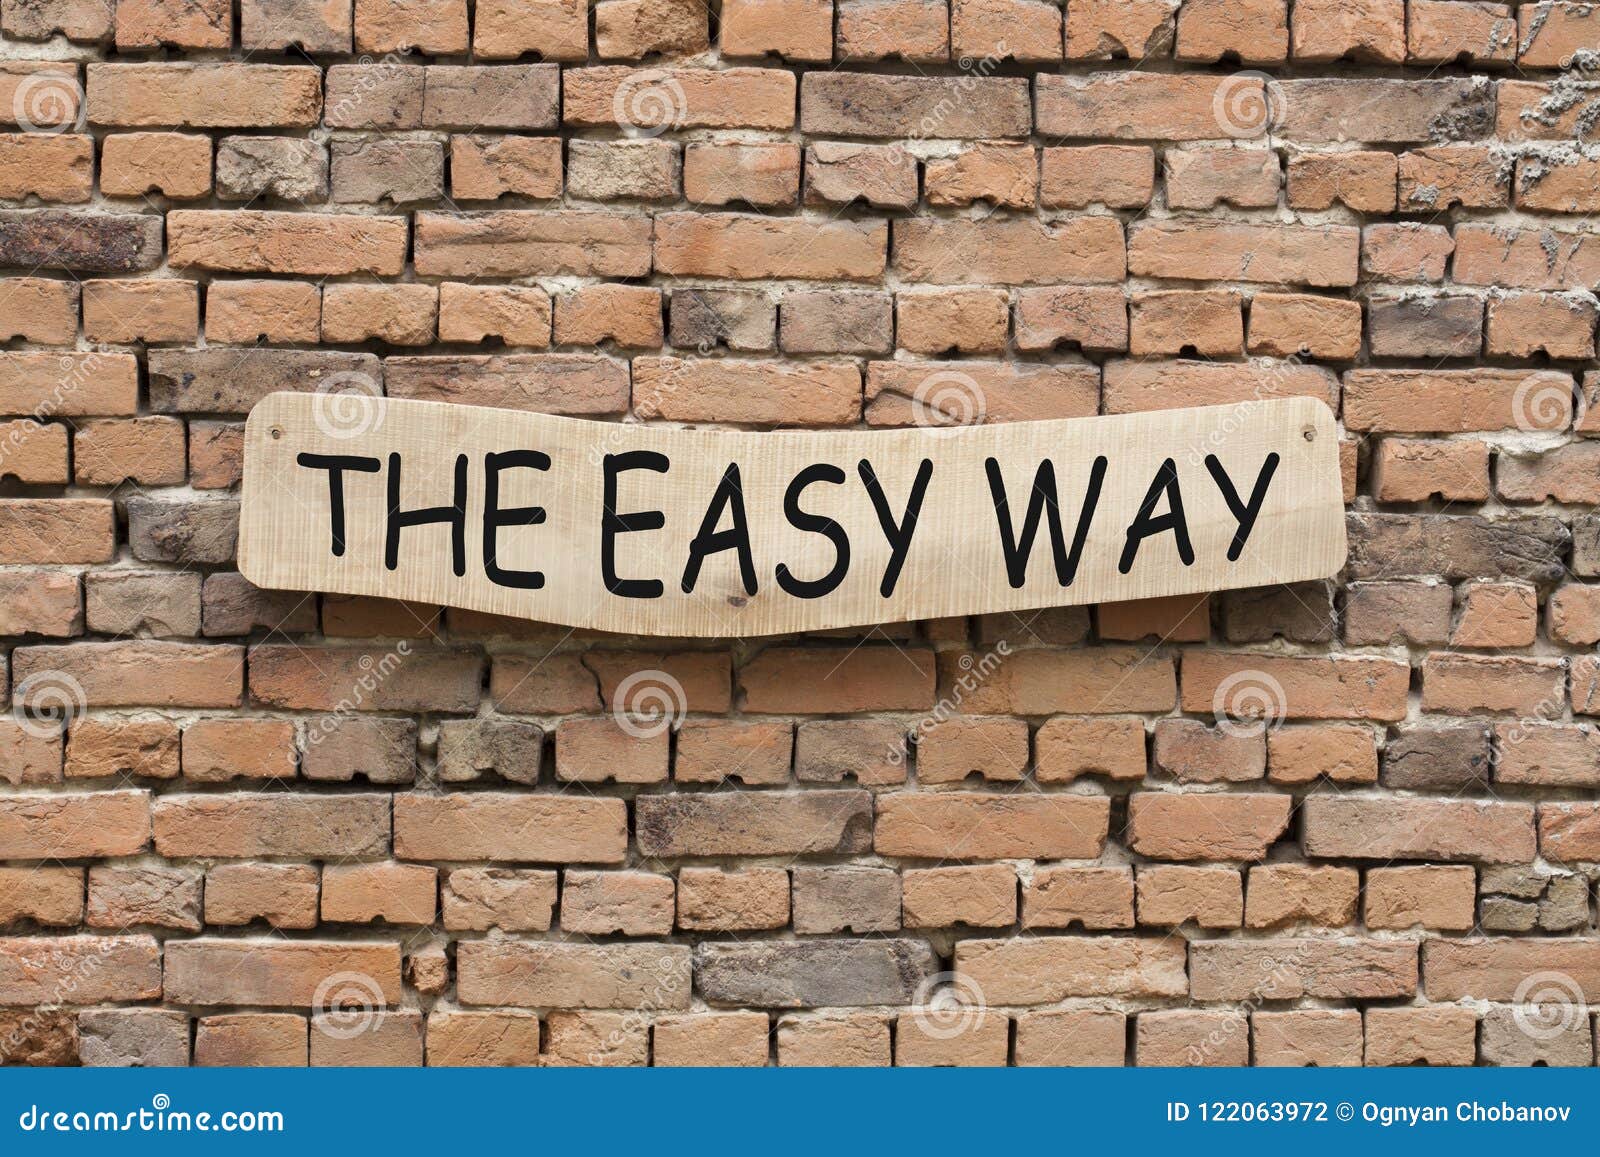 the easy way